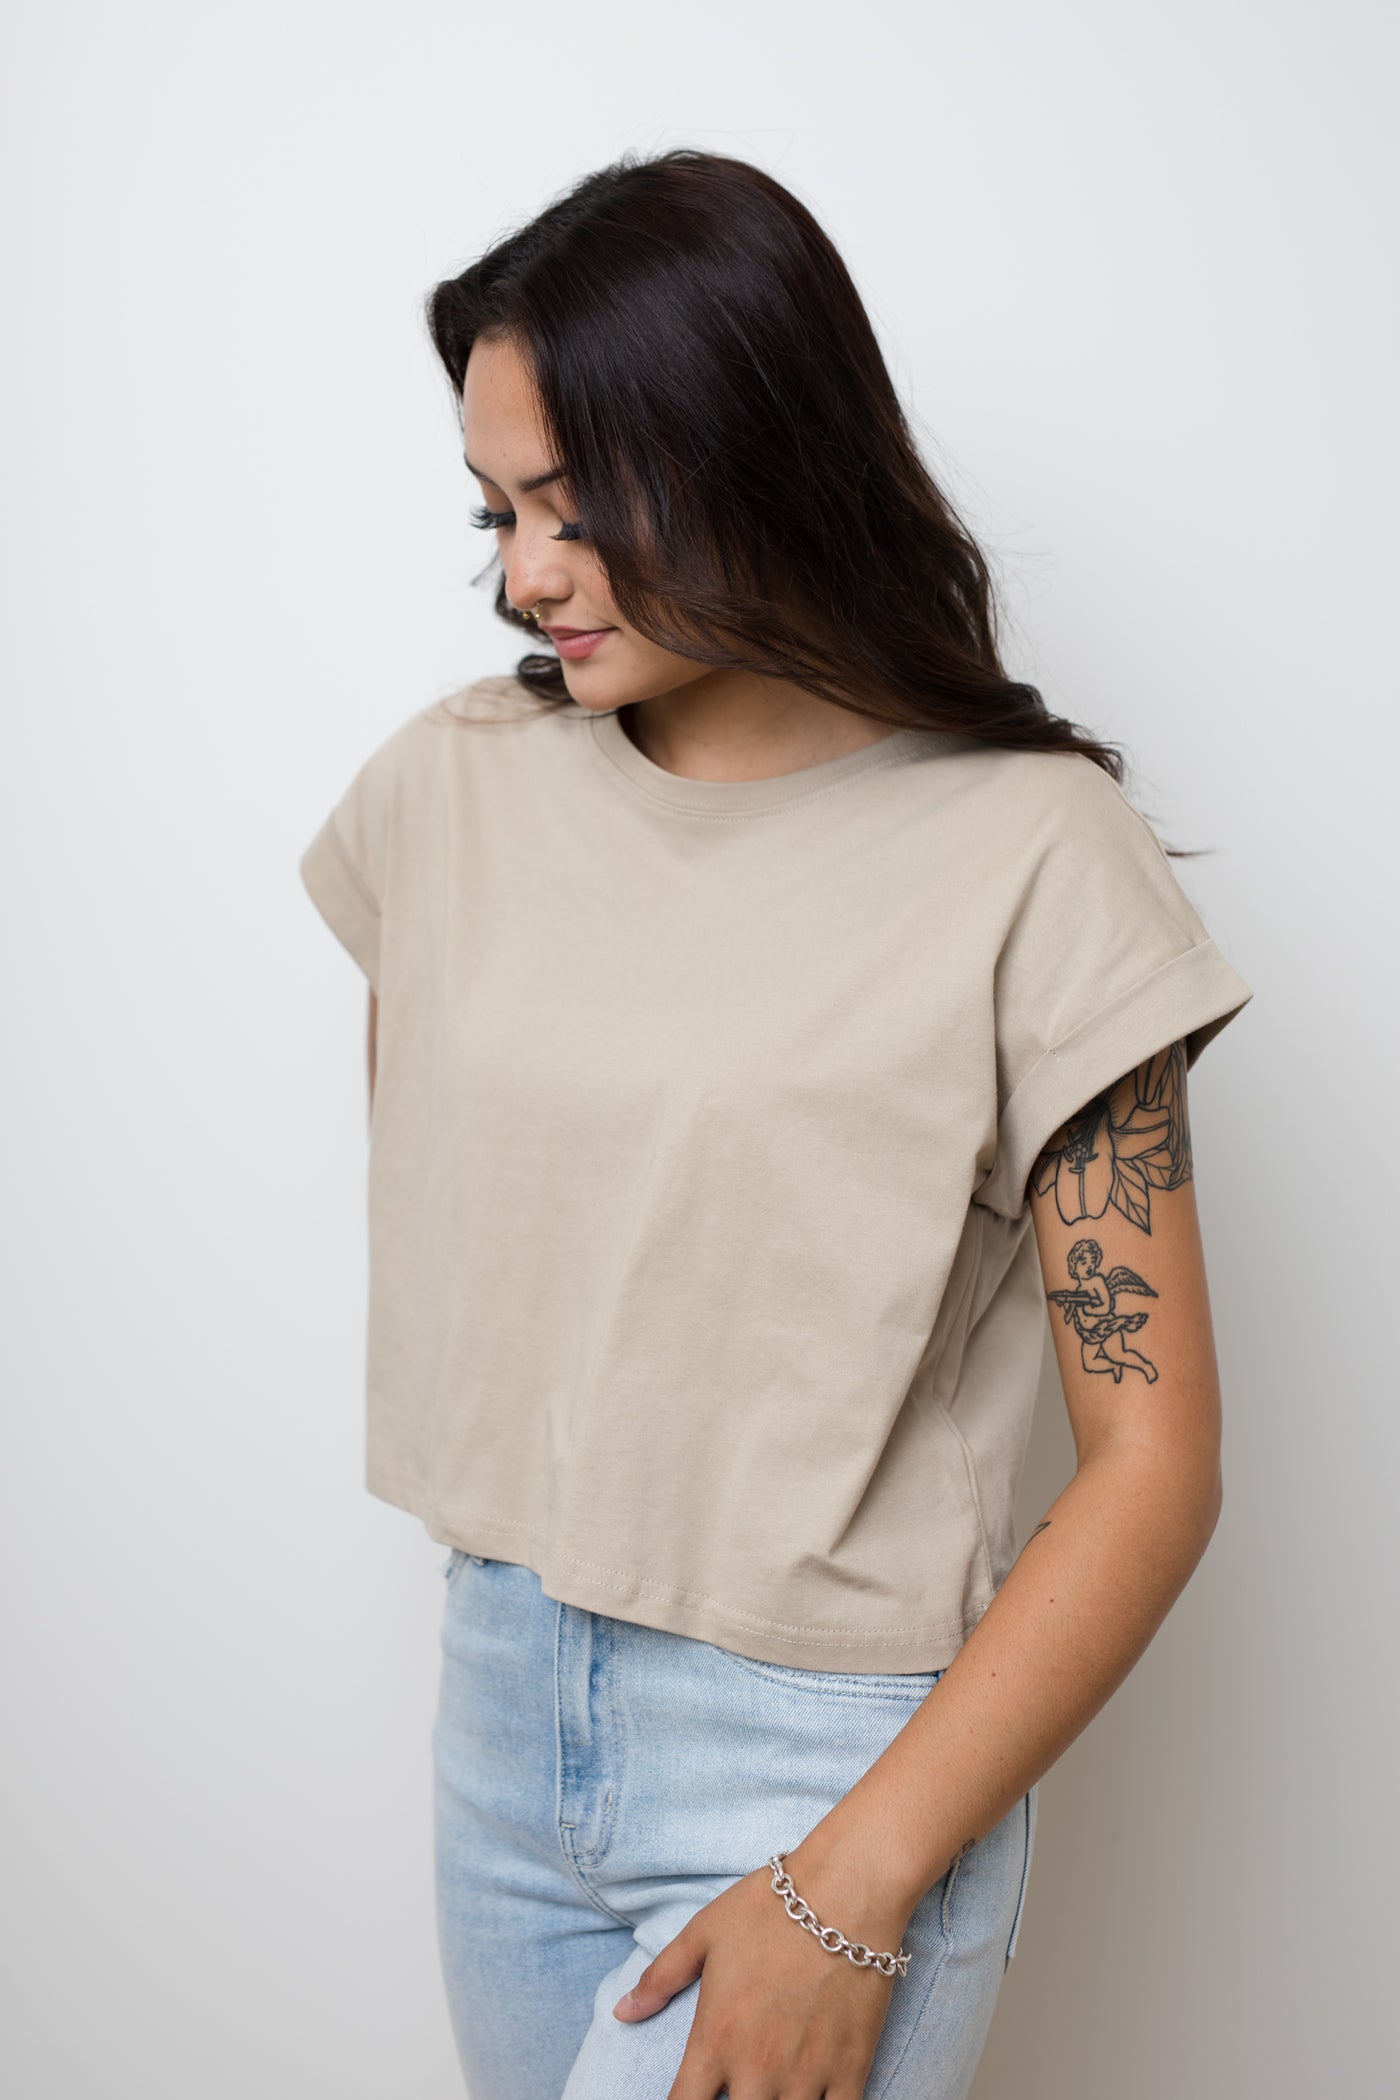 The Simple Life Stone T-Shirt